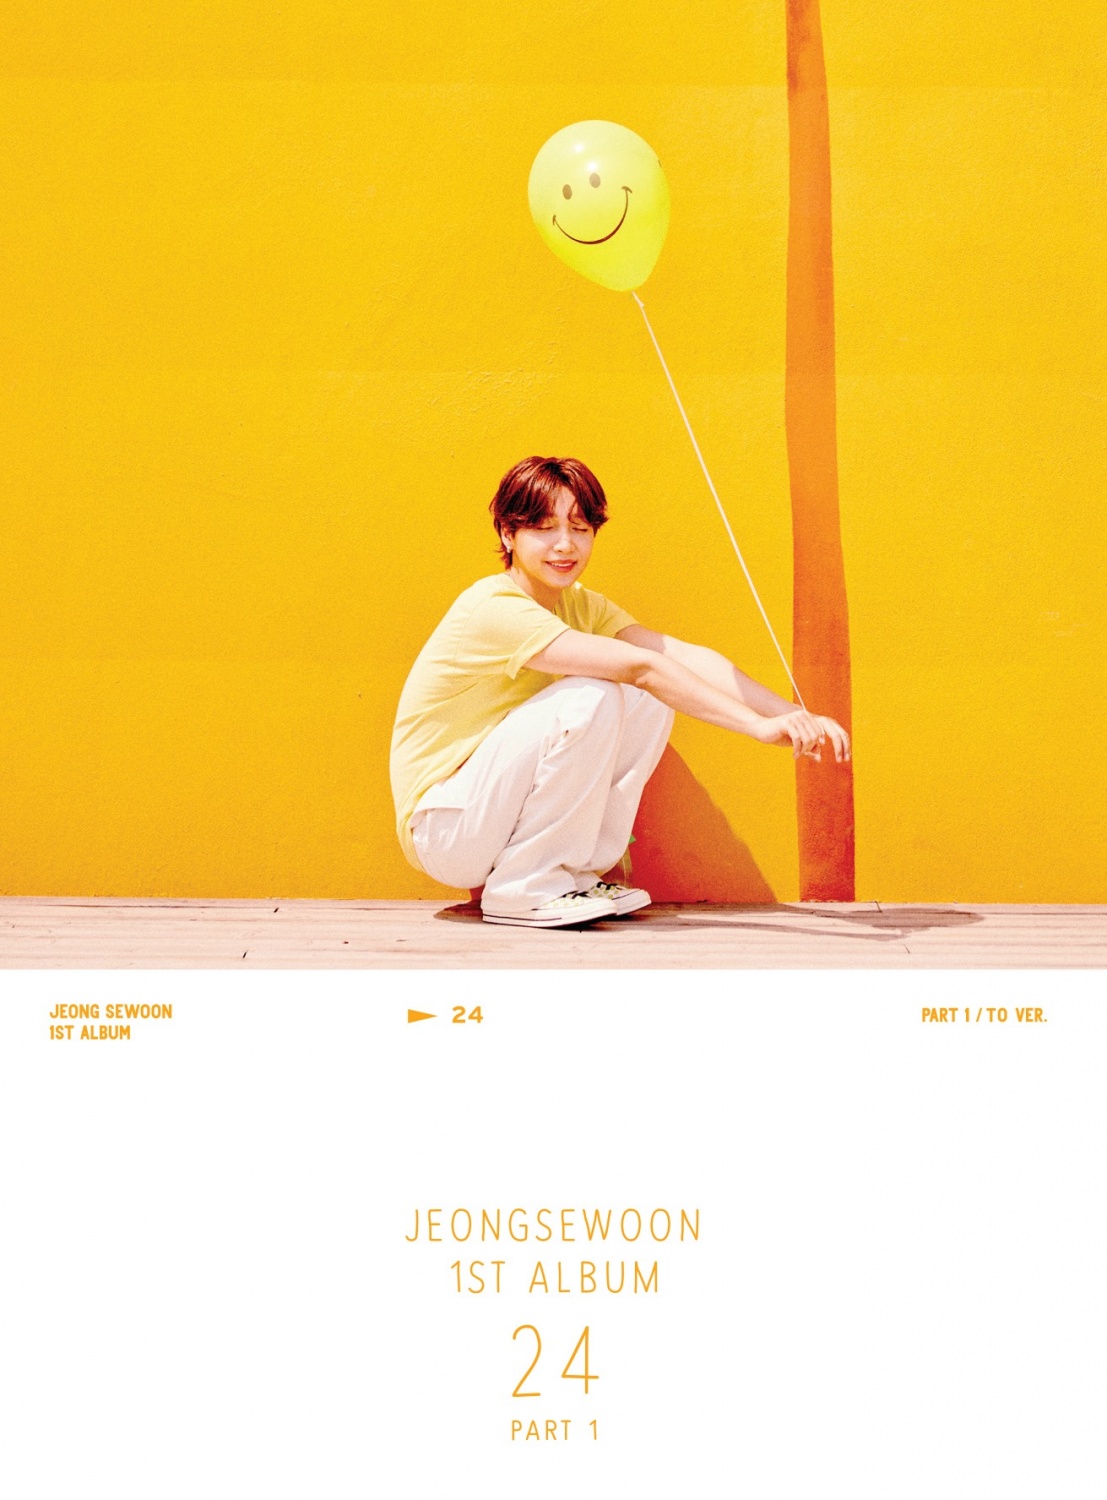 Jeong Sewoon Unveils Teaser Images for Upcoming 1st Album "24 Part 1"